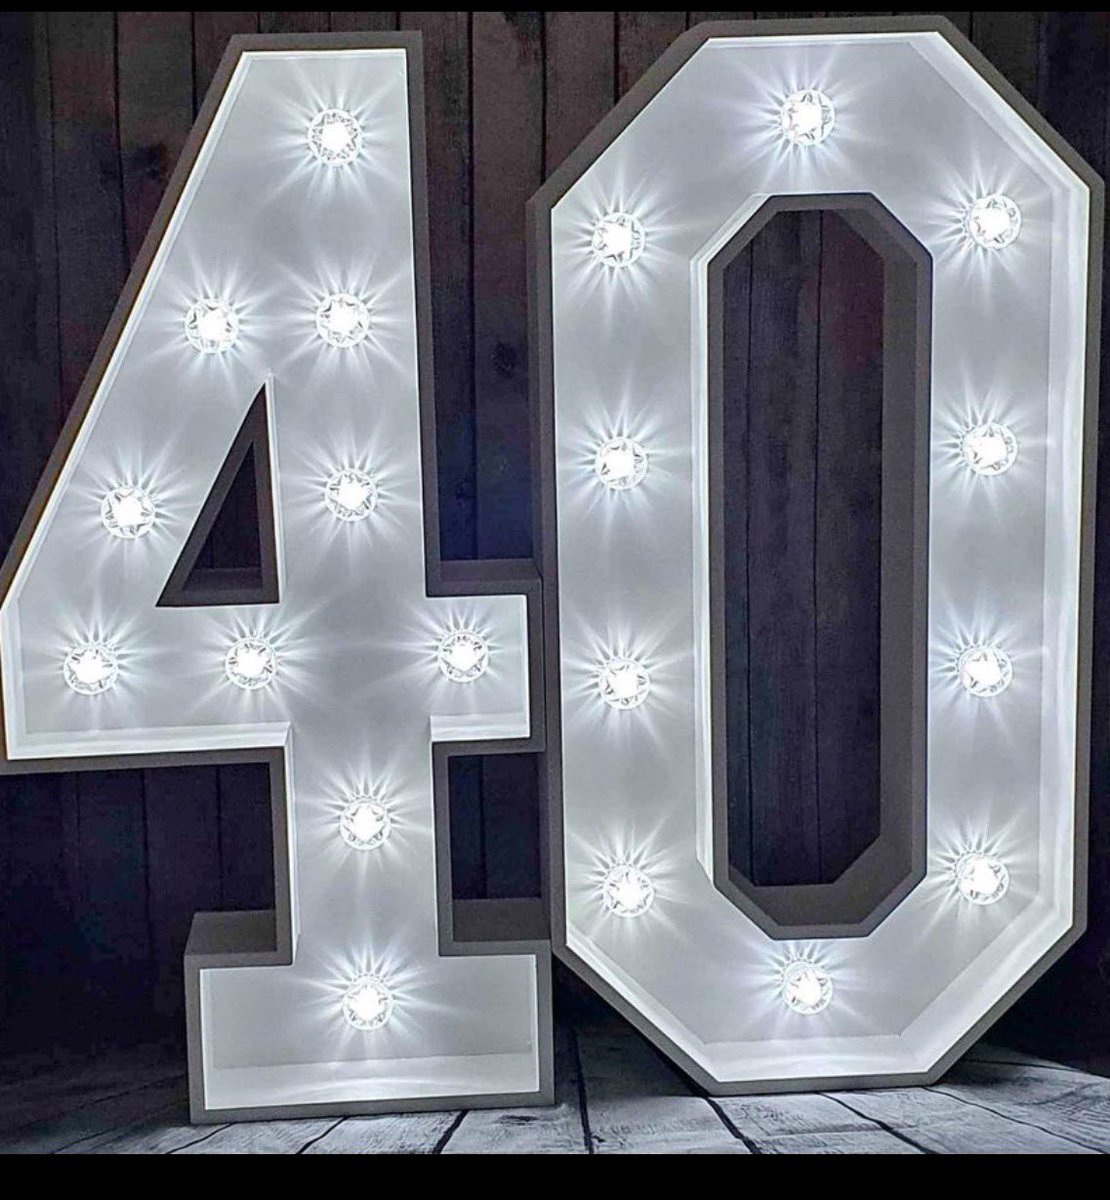 We are going to start sneaking out some of our 40th celebration secrets soon. Keep an eye out on the website and socials. 🍾🎈❤️🅰️